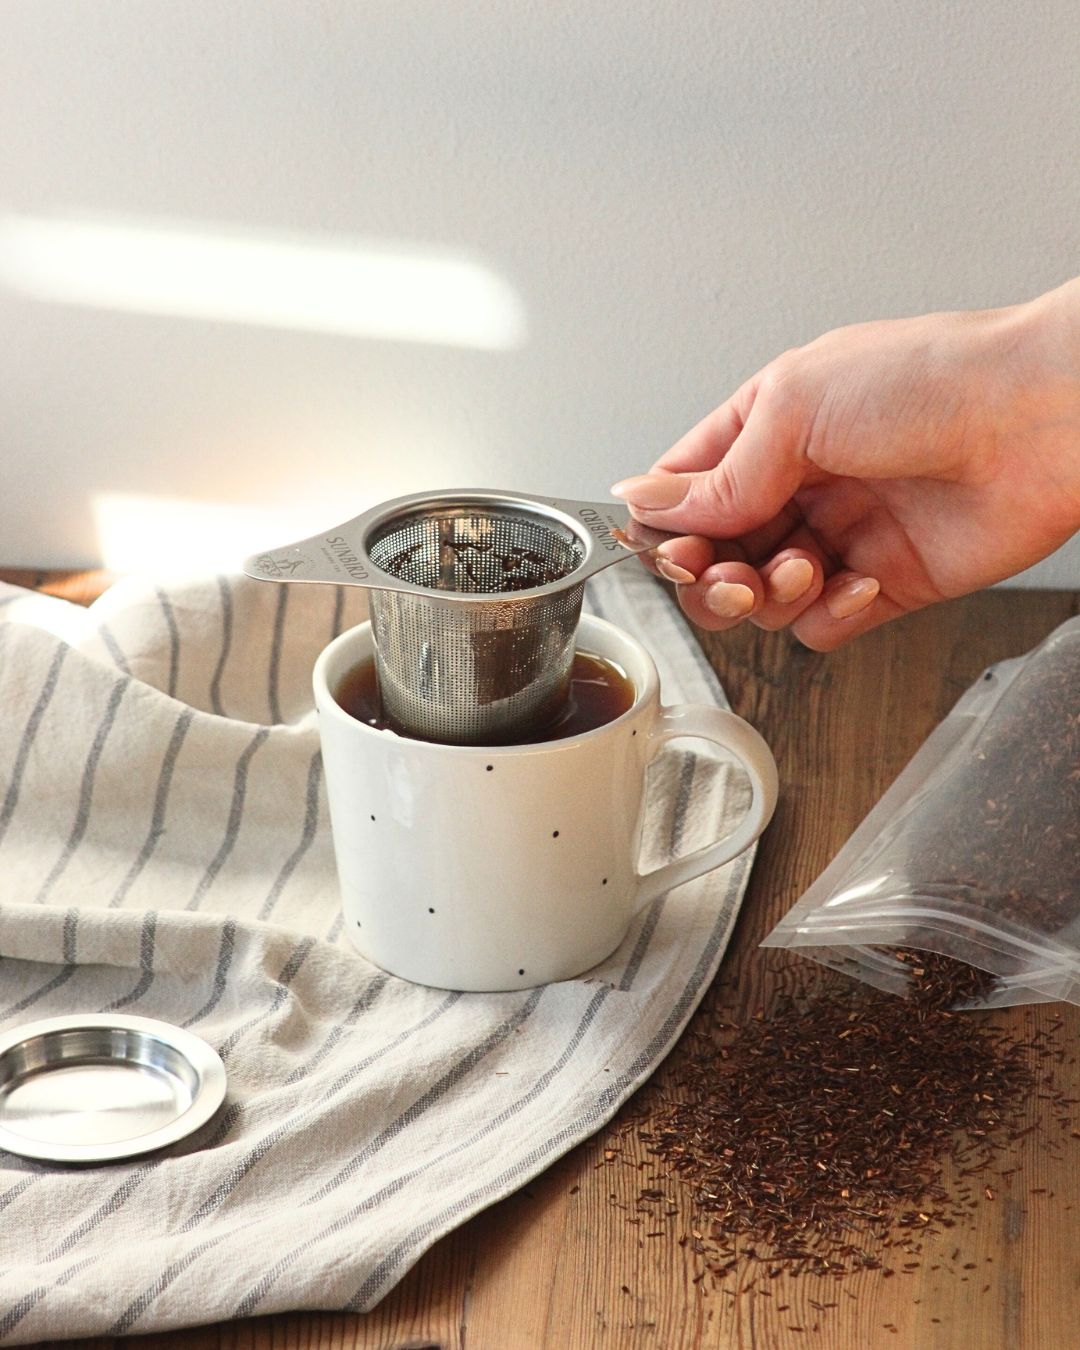 Stainless steel tea infuser with a lid